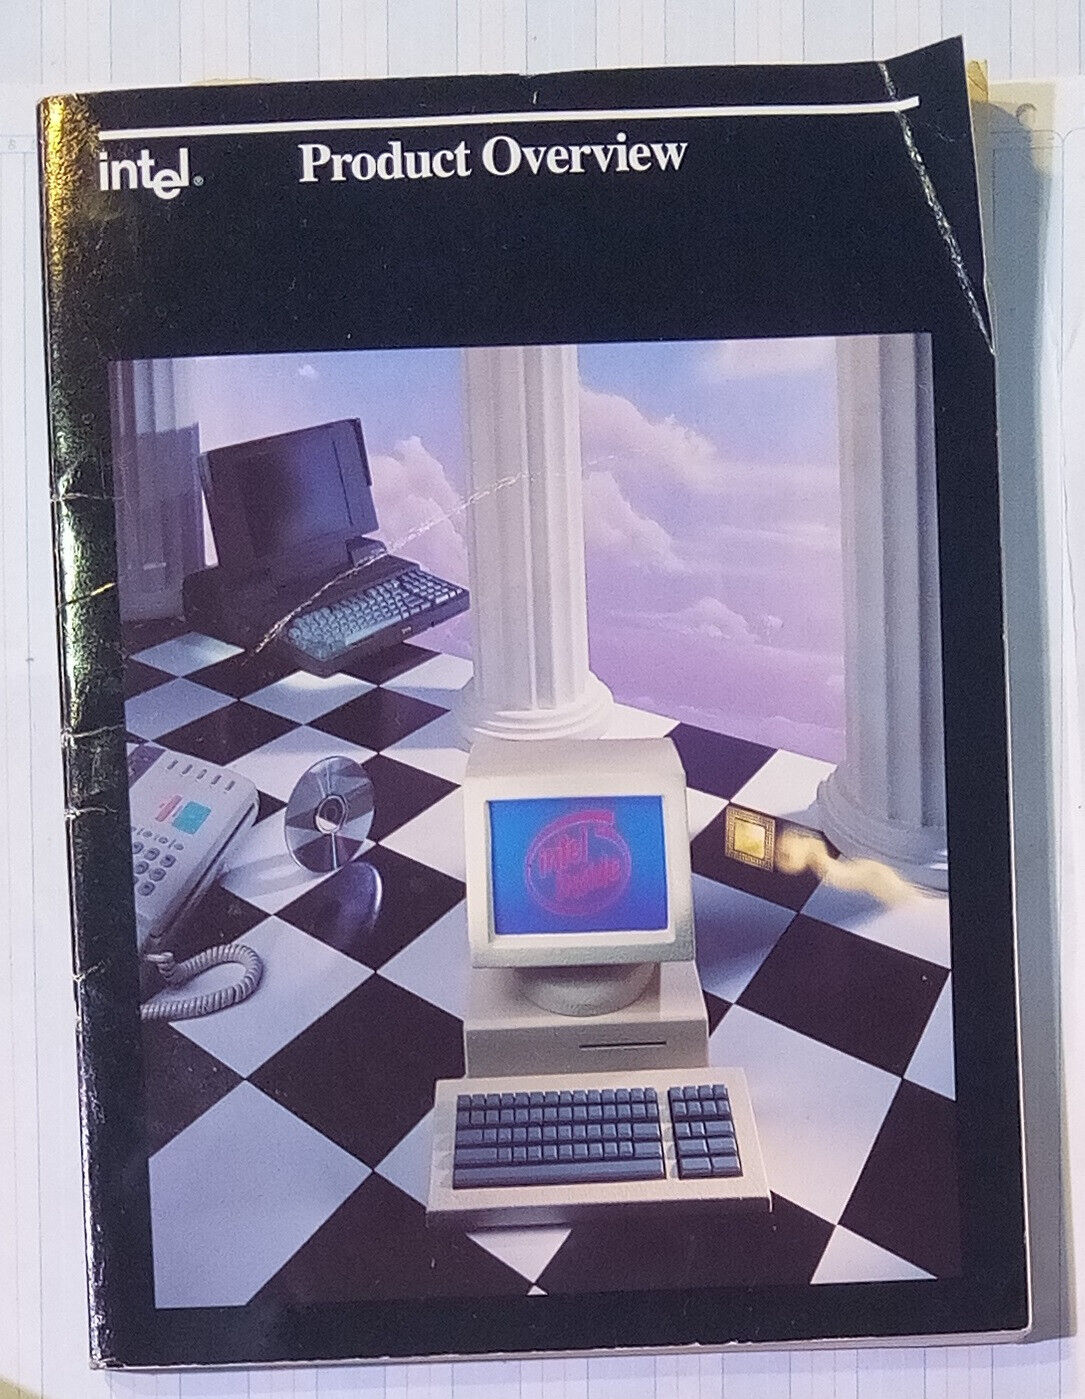 Intel Product Overview - A Guide to Intel Architectures and Applications -1992